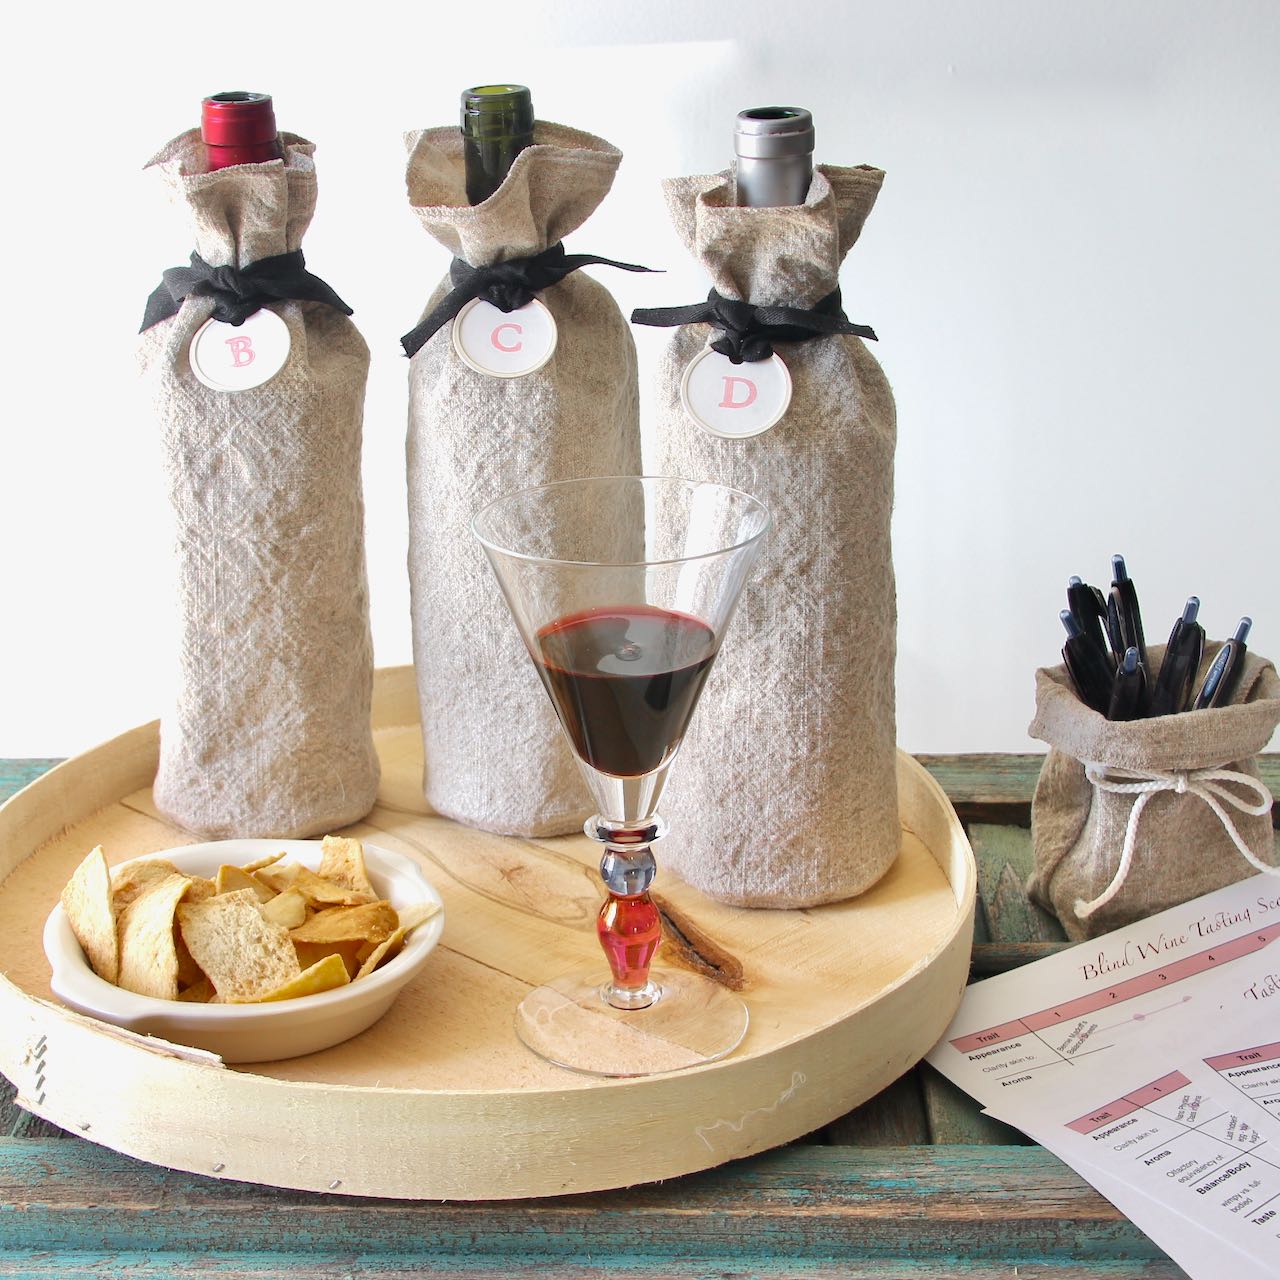 Three wine bottles in washed linen bags tied with lettered labels on a cheese box lid with a bowl of pita chips and a glass of wine poured.